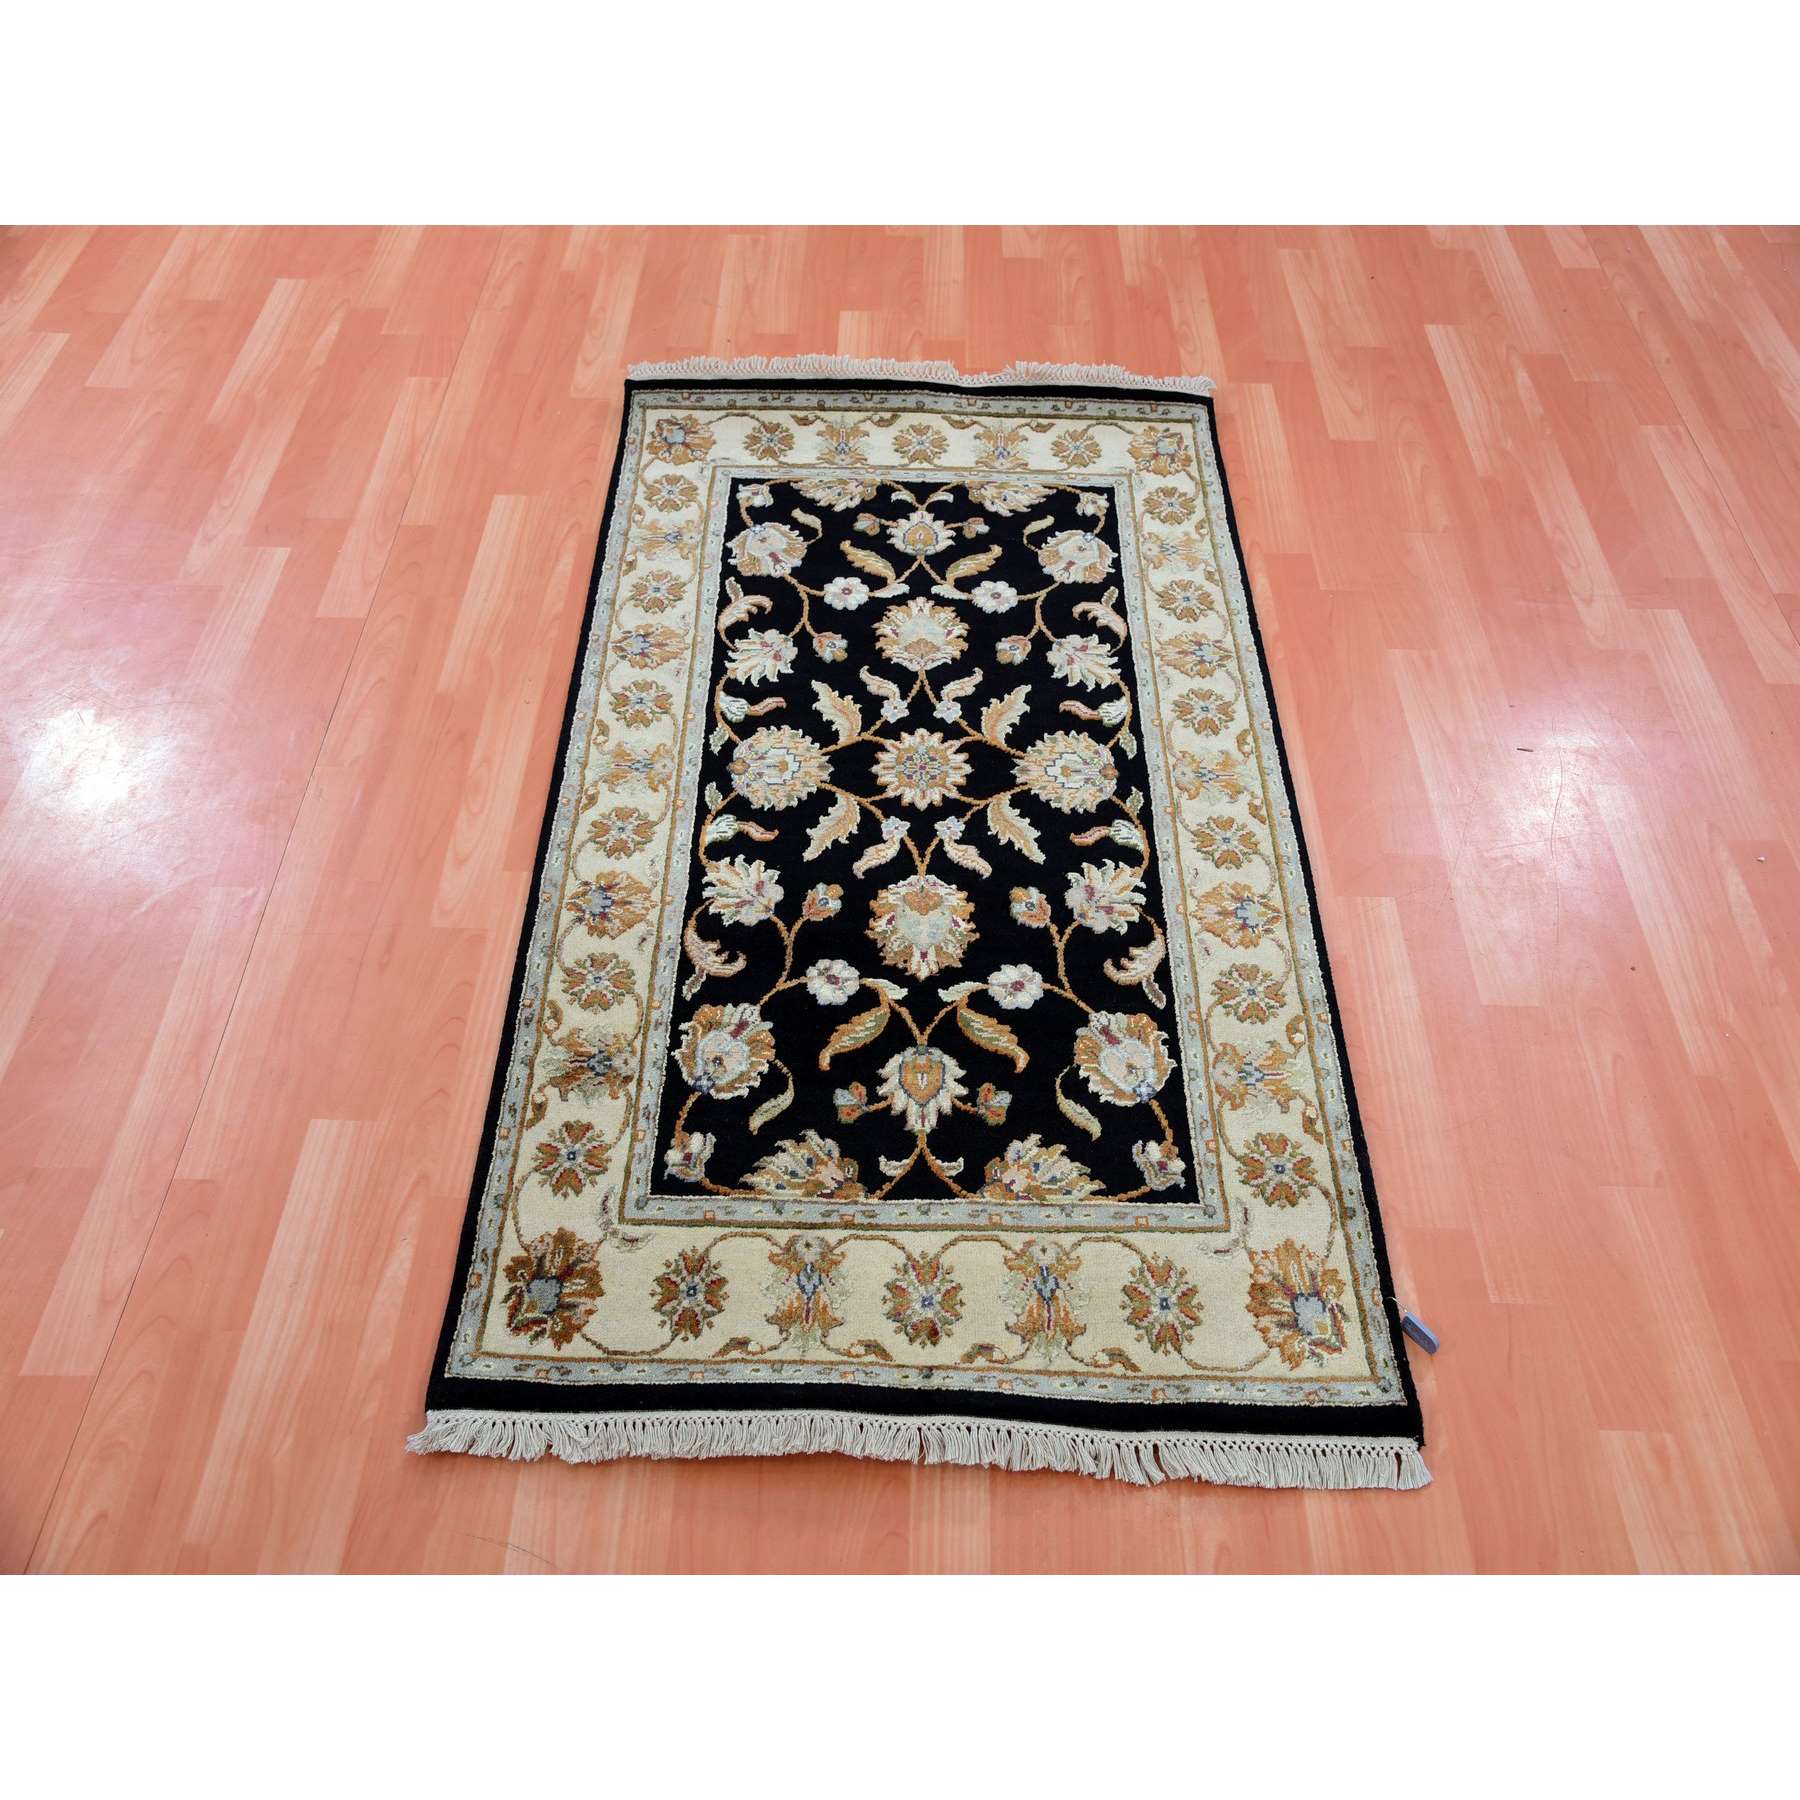 Rajasthan-Hand-Knotted-Rug-377025